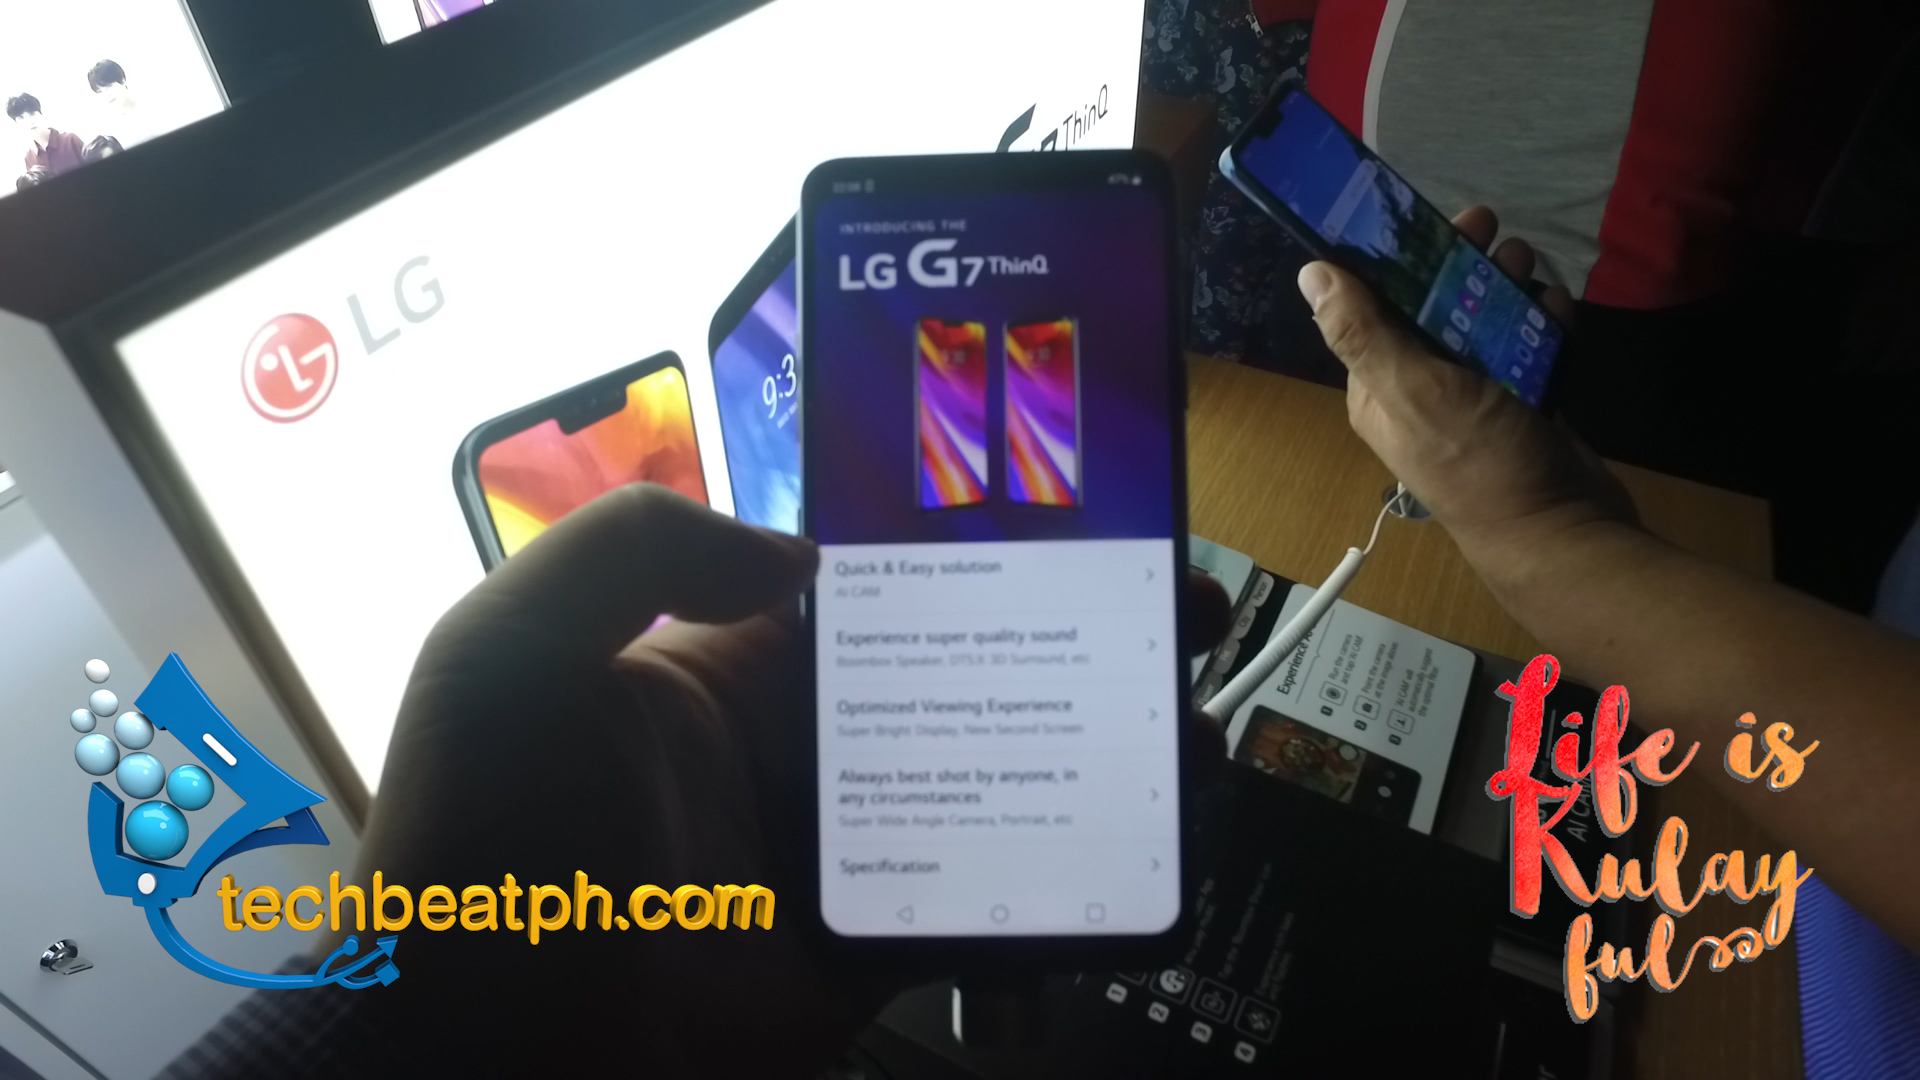 LG G7 ThinQ X BTS Launch in the Philippines